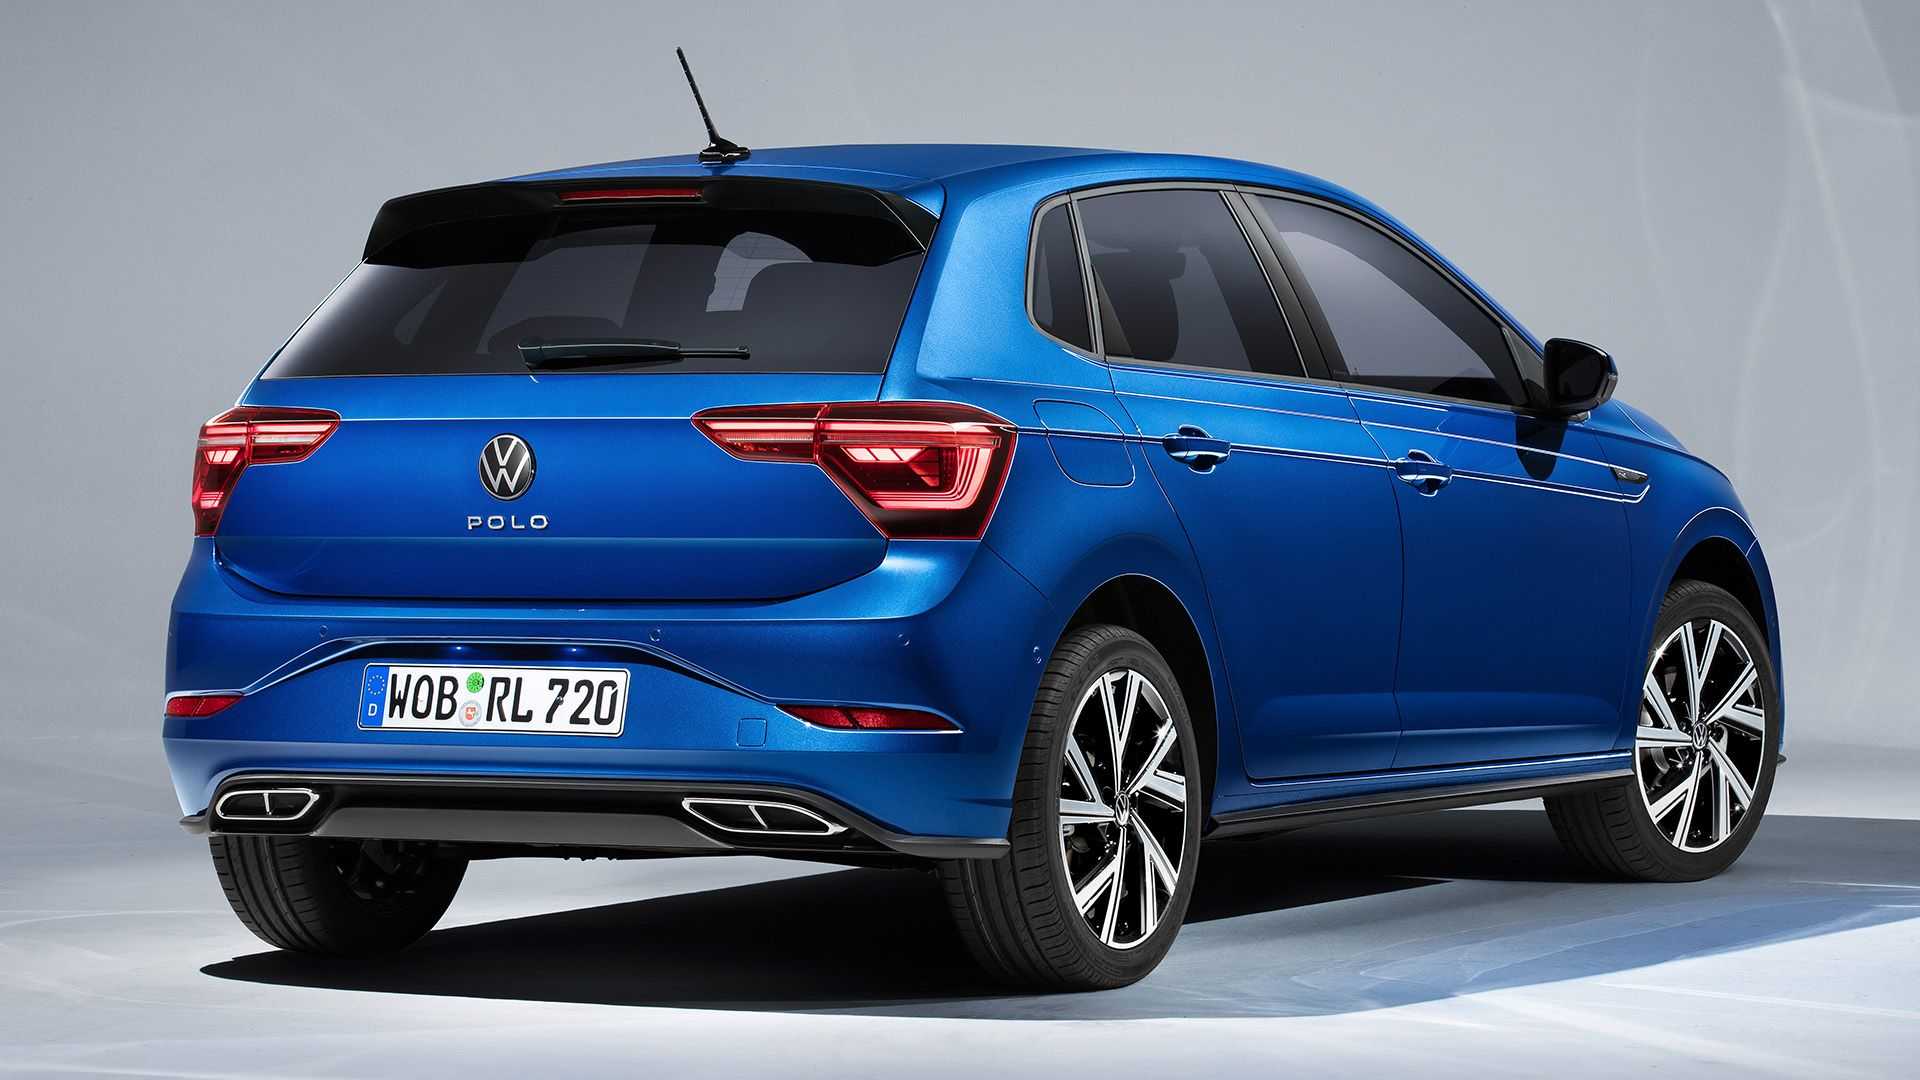 The new Volkswagen Polo: the last round of evolution